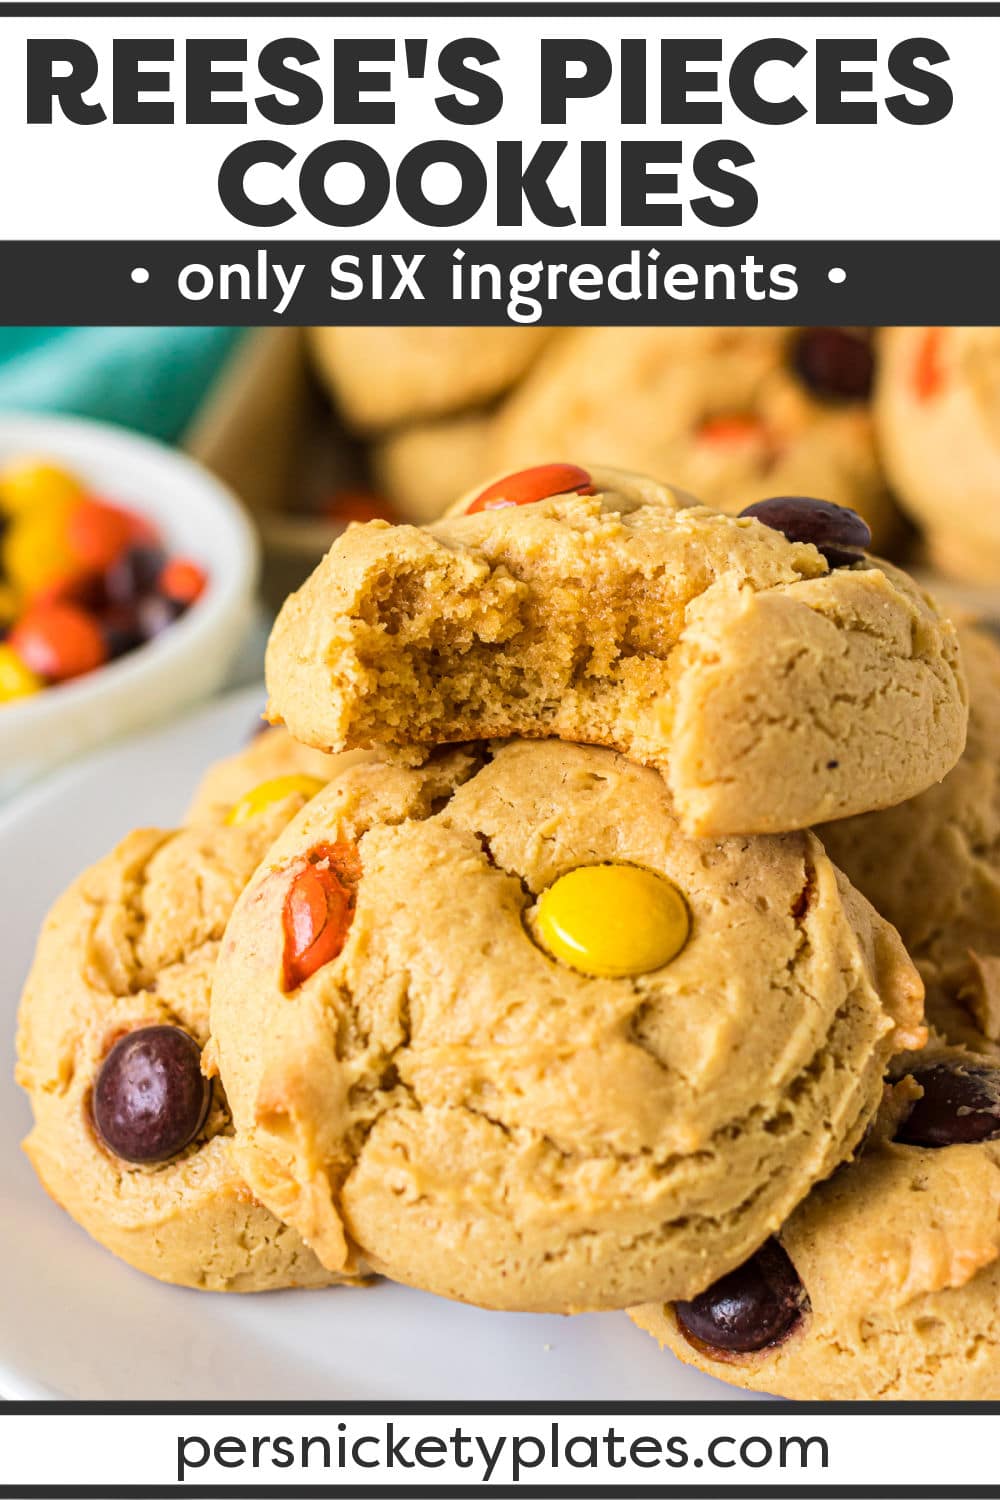 Only 6 ingredients in these easy Reese's Pieces Cookies made with cake mix! They are soft and pillowy and perfect for peanut butter lovers. | www.persnicketyplates.com